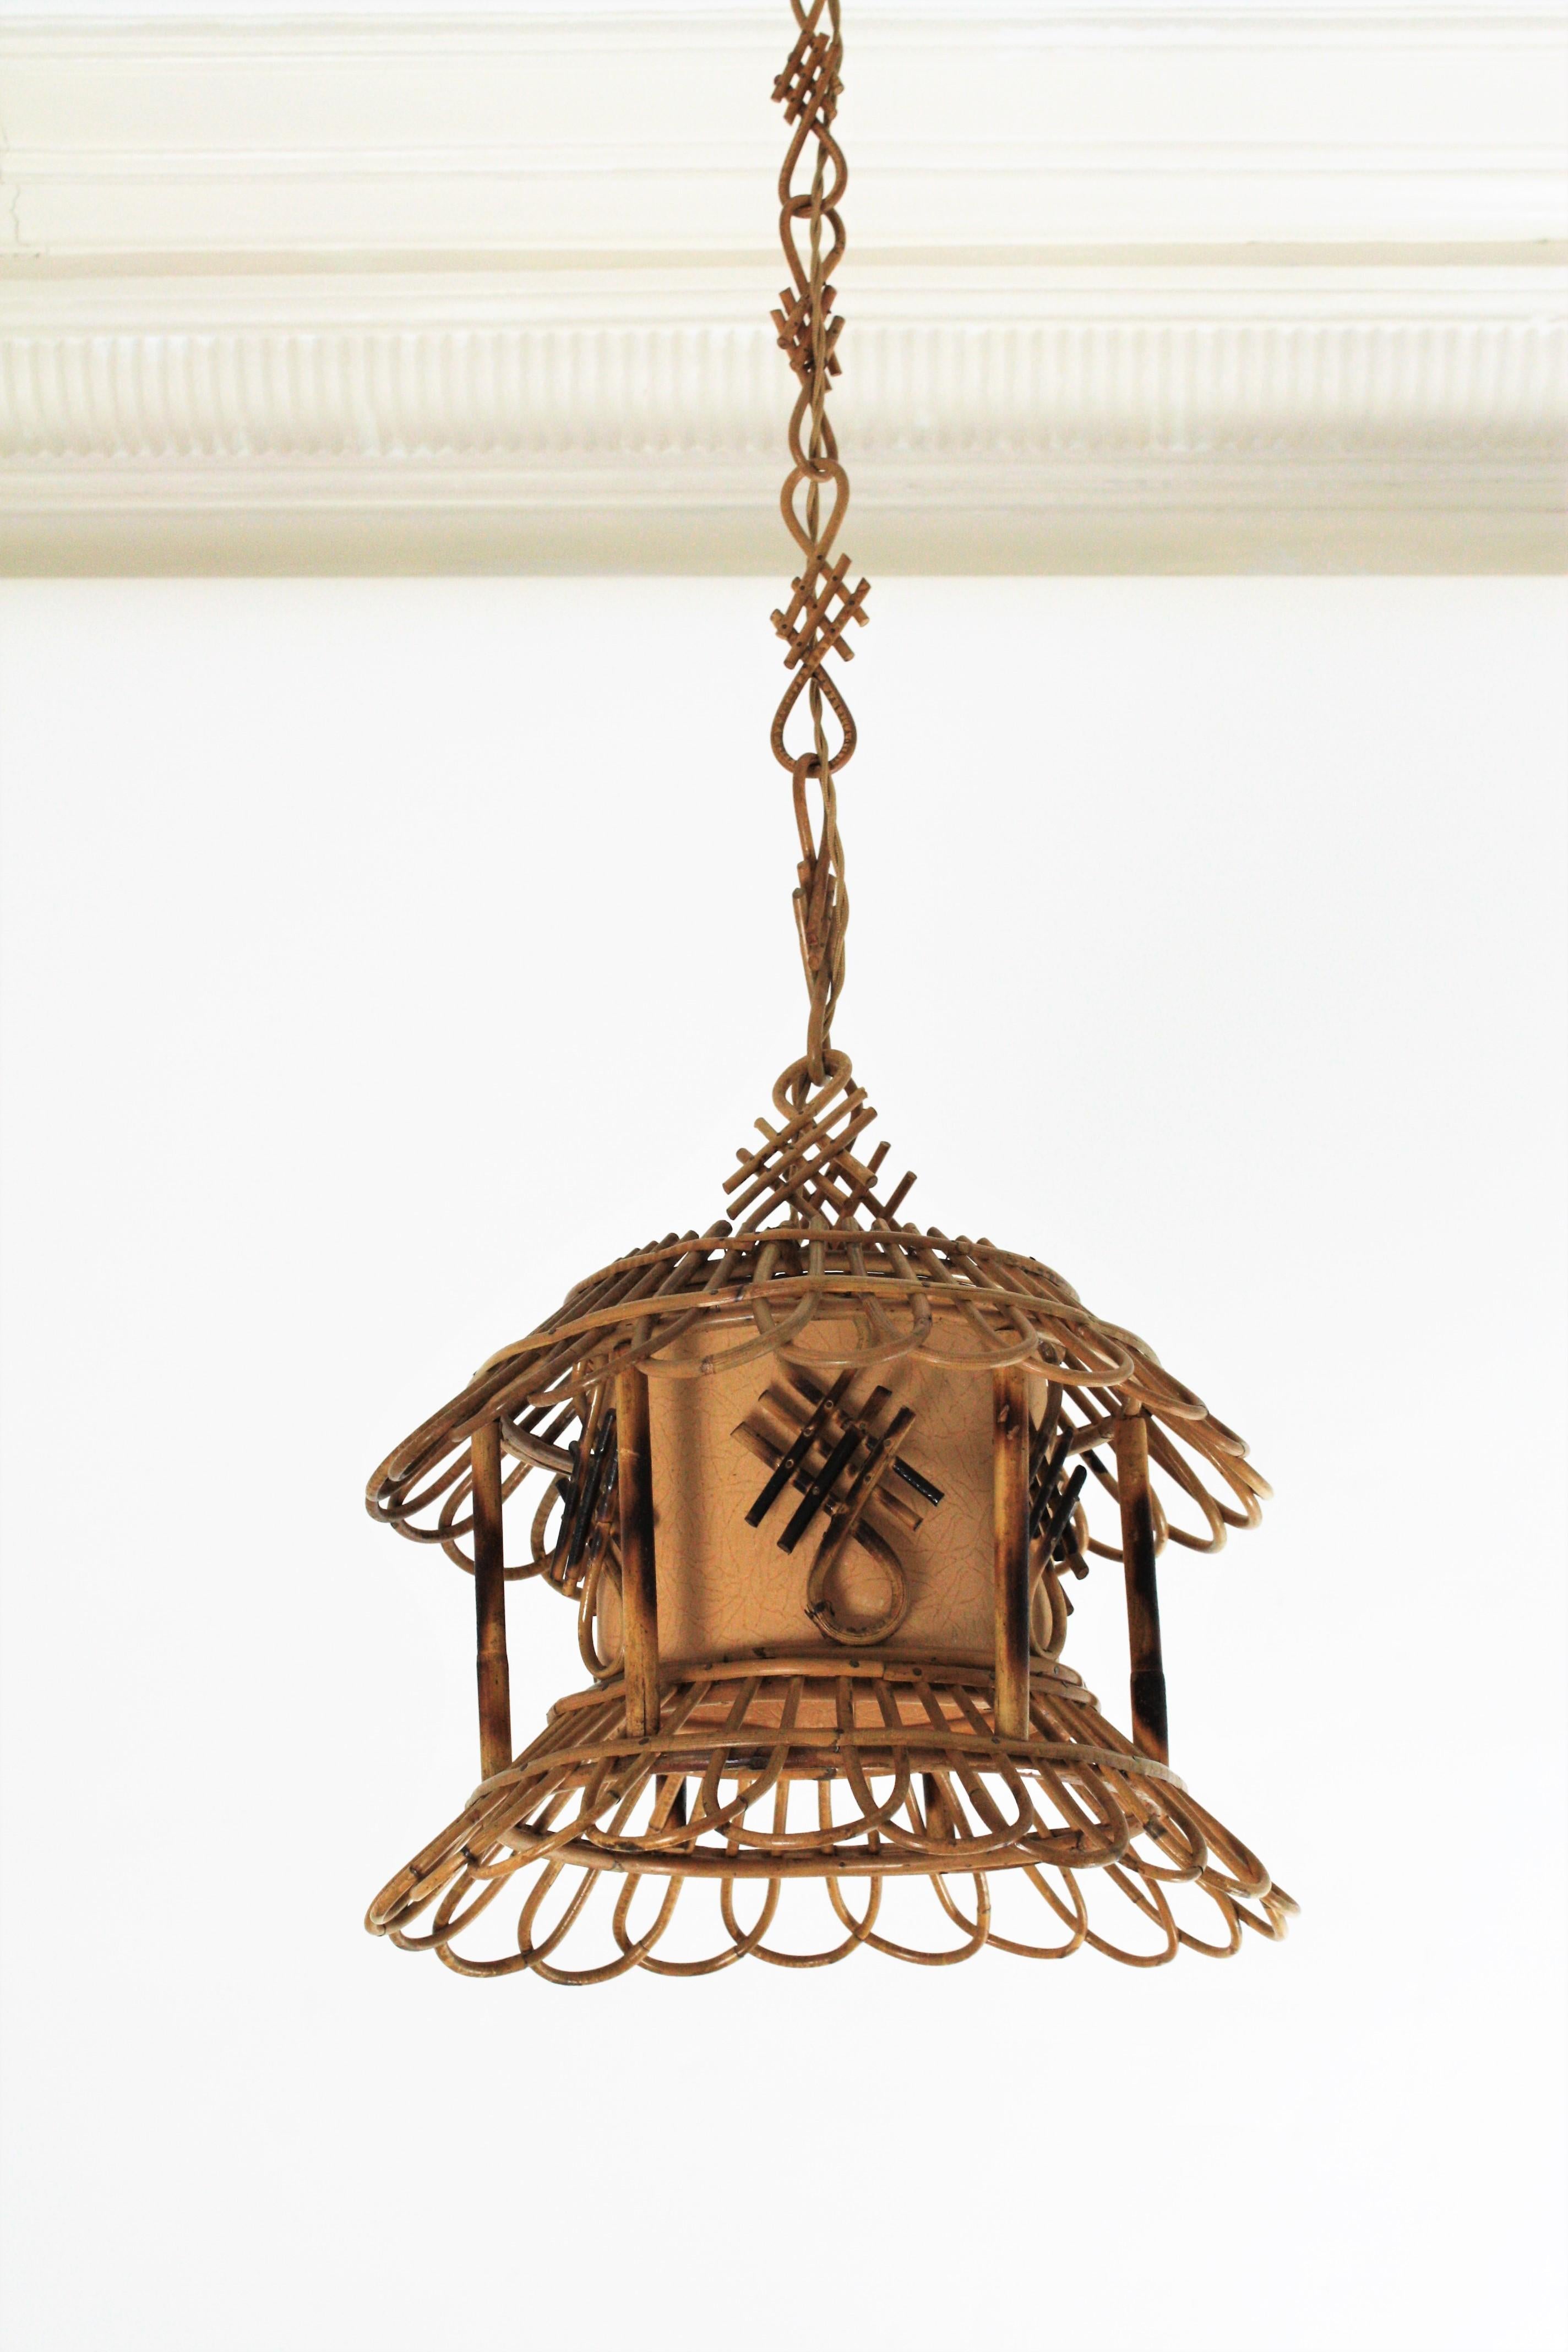 20th Century French Modernist Rattan Pagoda Pendant / Hanging Light with Chinoiserie Accents